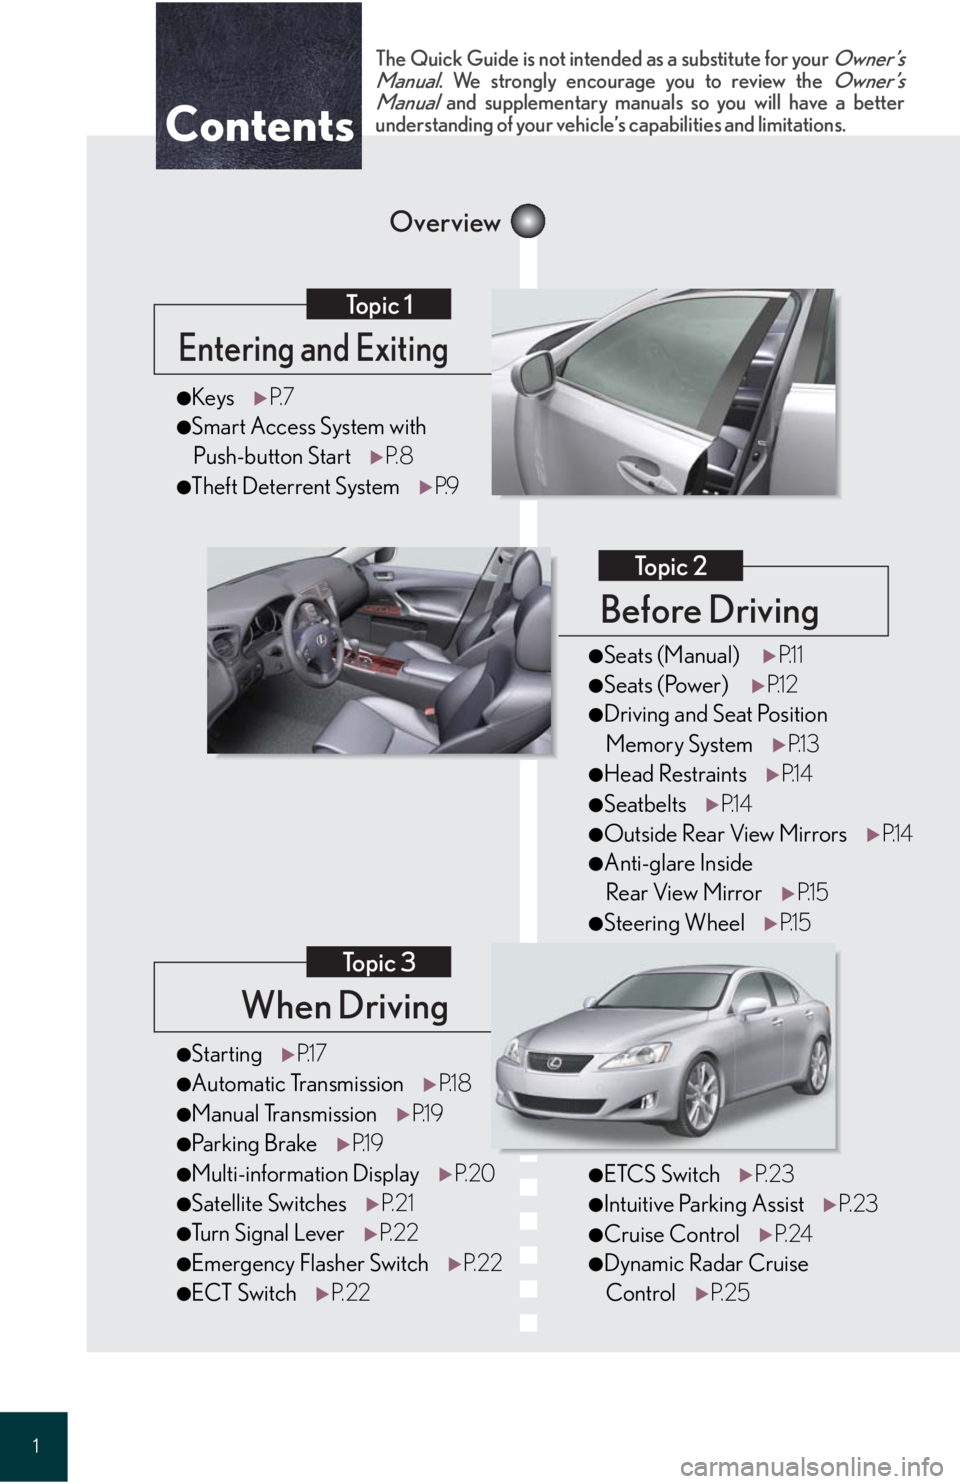 Lexus IS250 2008  Theft deterrent system / LEXUS 2008 IS 350/250 QUICK GUIDE OWNERS MANUAL (OM60D81U) 1
When Driving
Topic 3
Entering and Exiting
Topic 1
Before Driving
Topic 2
Overview
Contents
●StartingP.1 7
●Automatic Transmission P.1 8
●Manual TransmissionP.1 9
●Parking BrakeP.1 9
●Multi